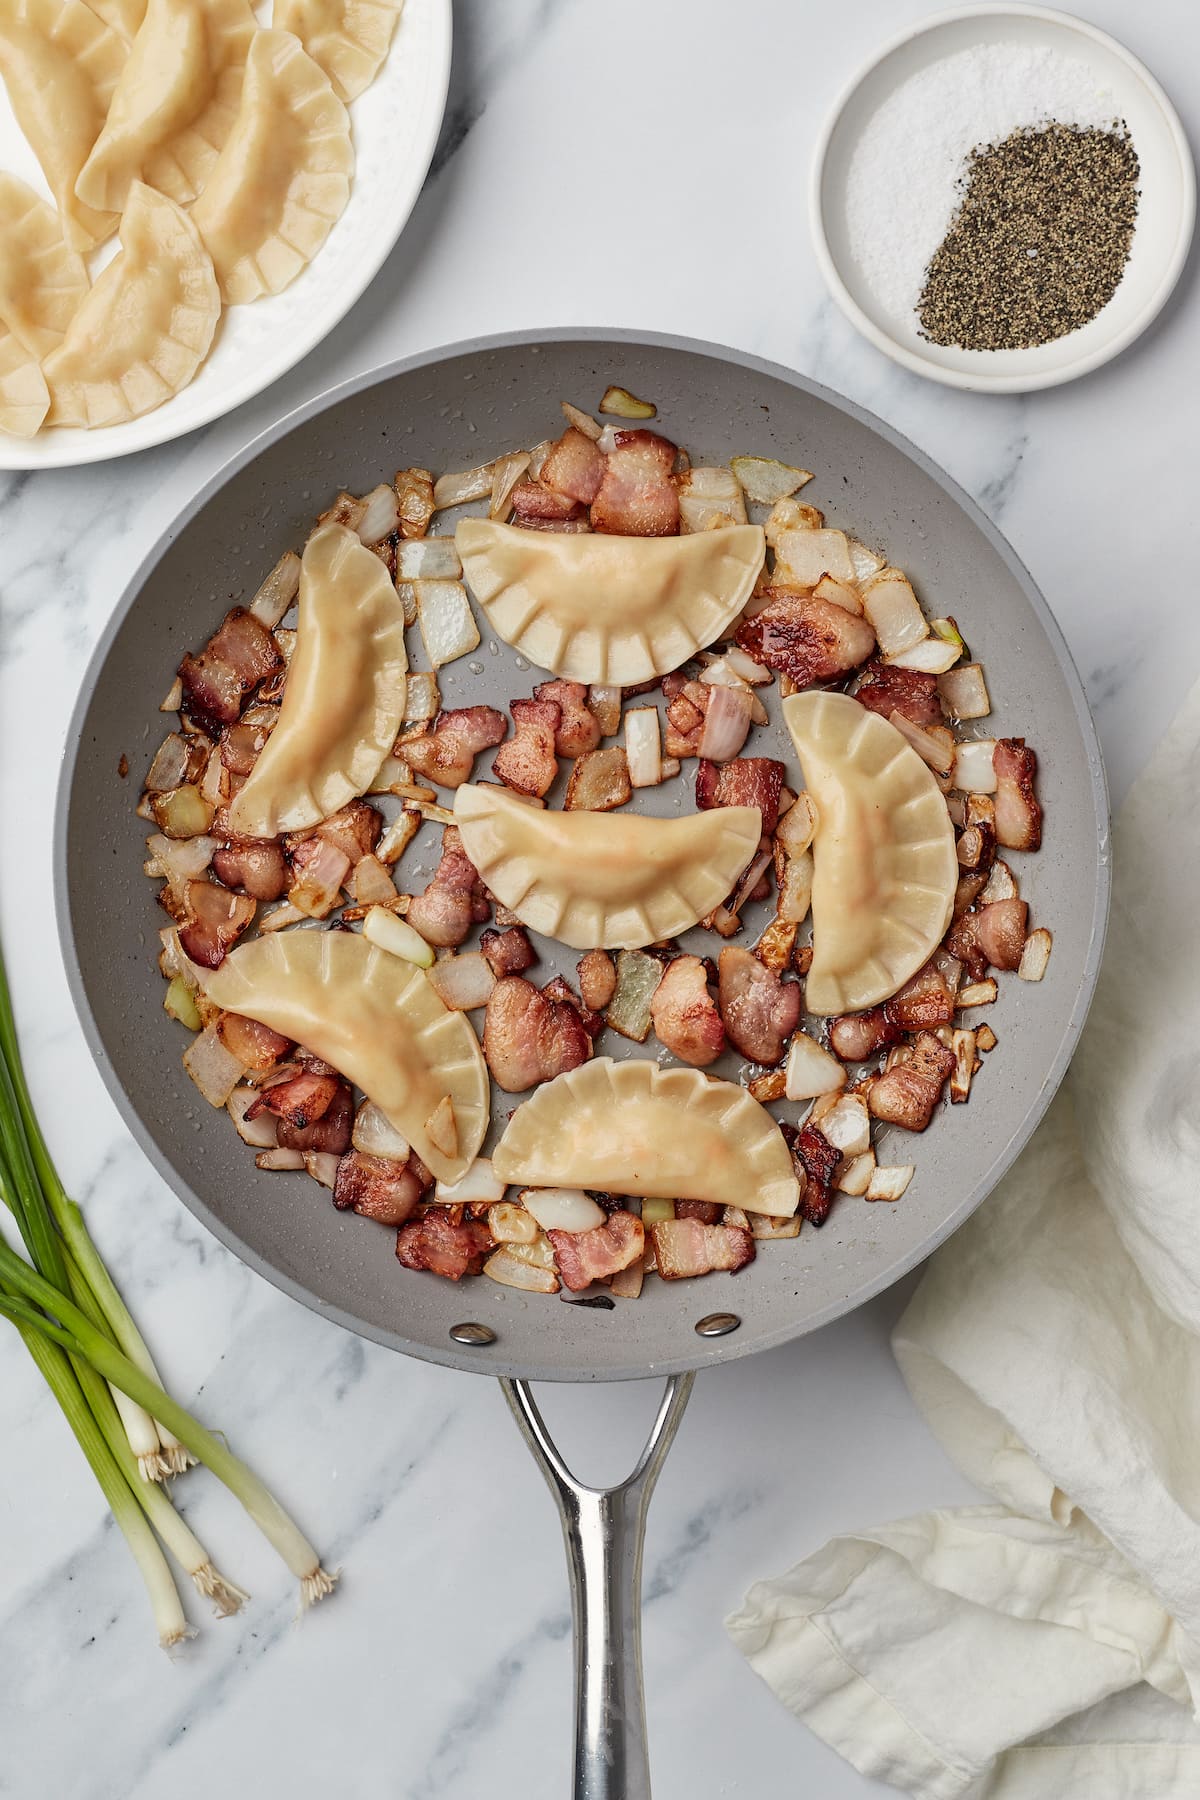 A skillet with bacon, onions, and semi-circular dumplings made with wonton wrappers.